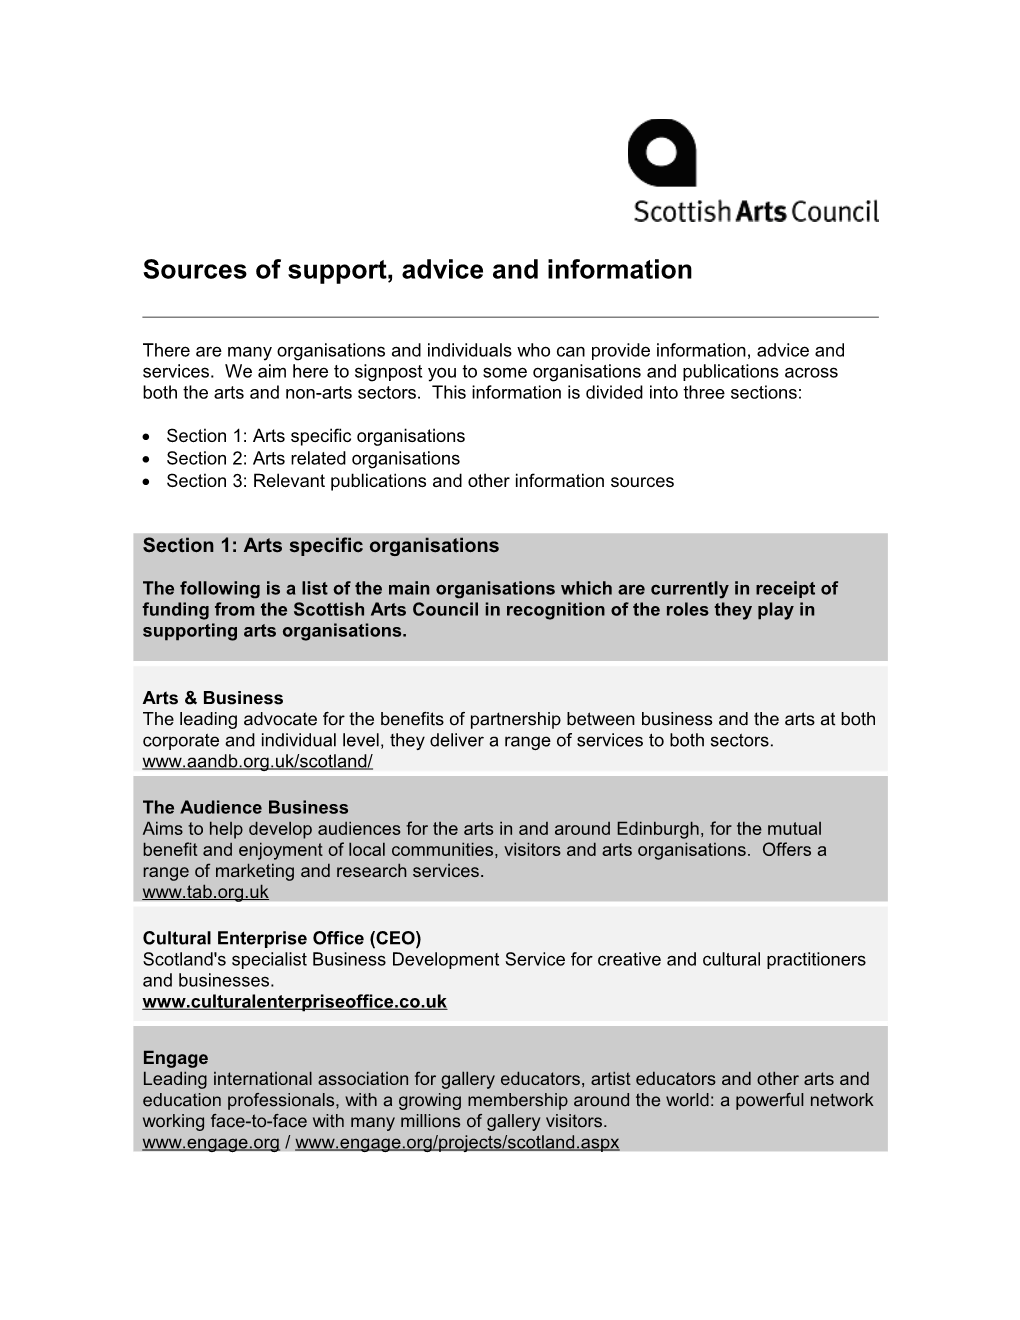 Sources of Support, Advice and Information